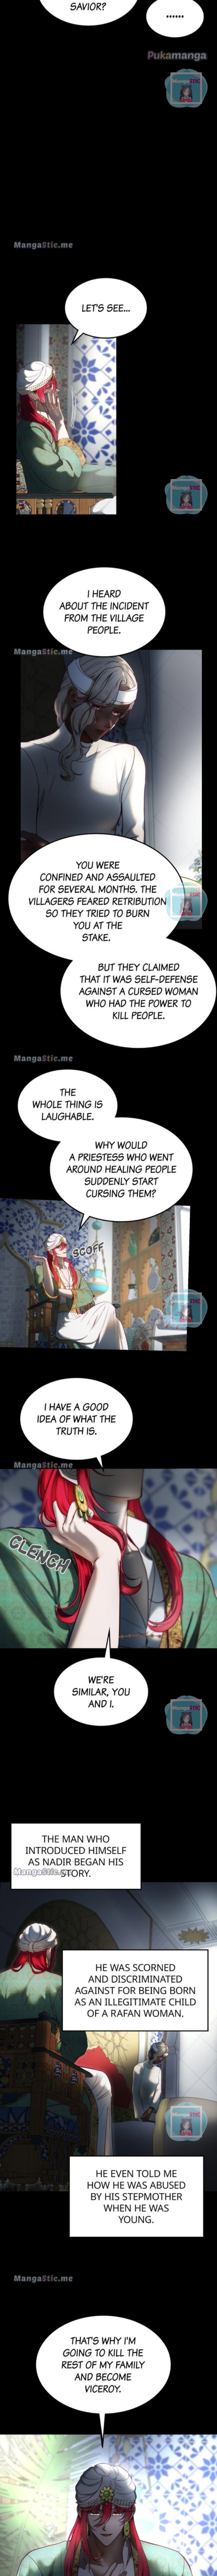 Amina Of The Lamp - Page 2